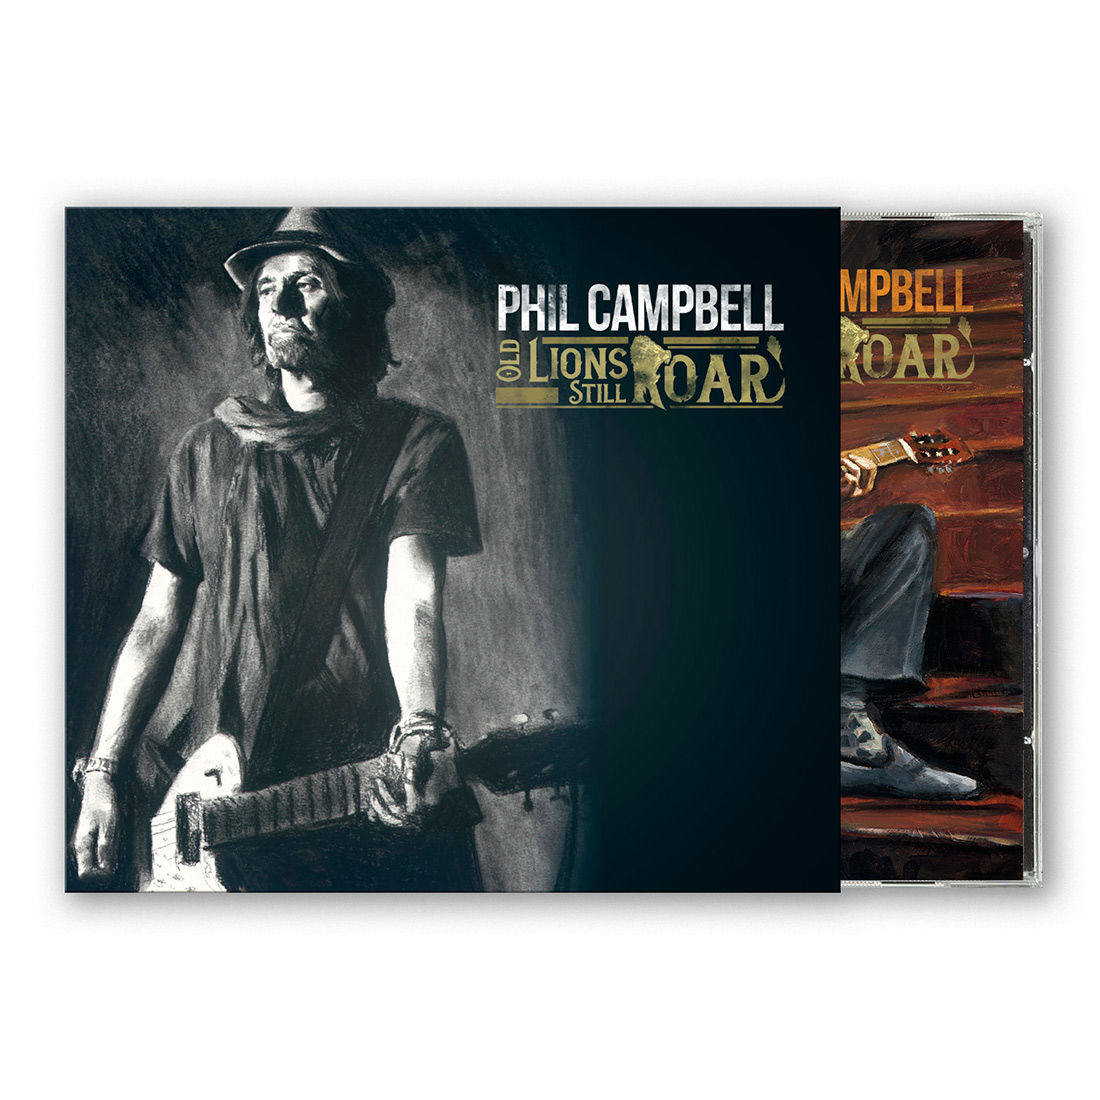 Phil Campbell - Old Lions Still Roar: Limited Edition CD in O-Card